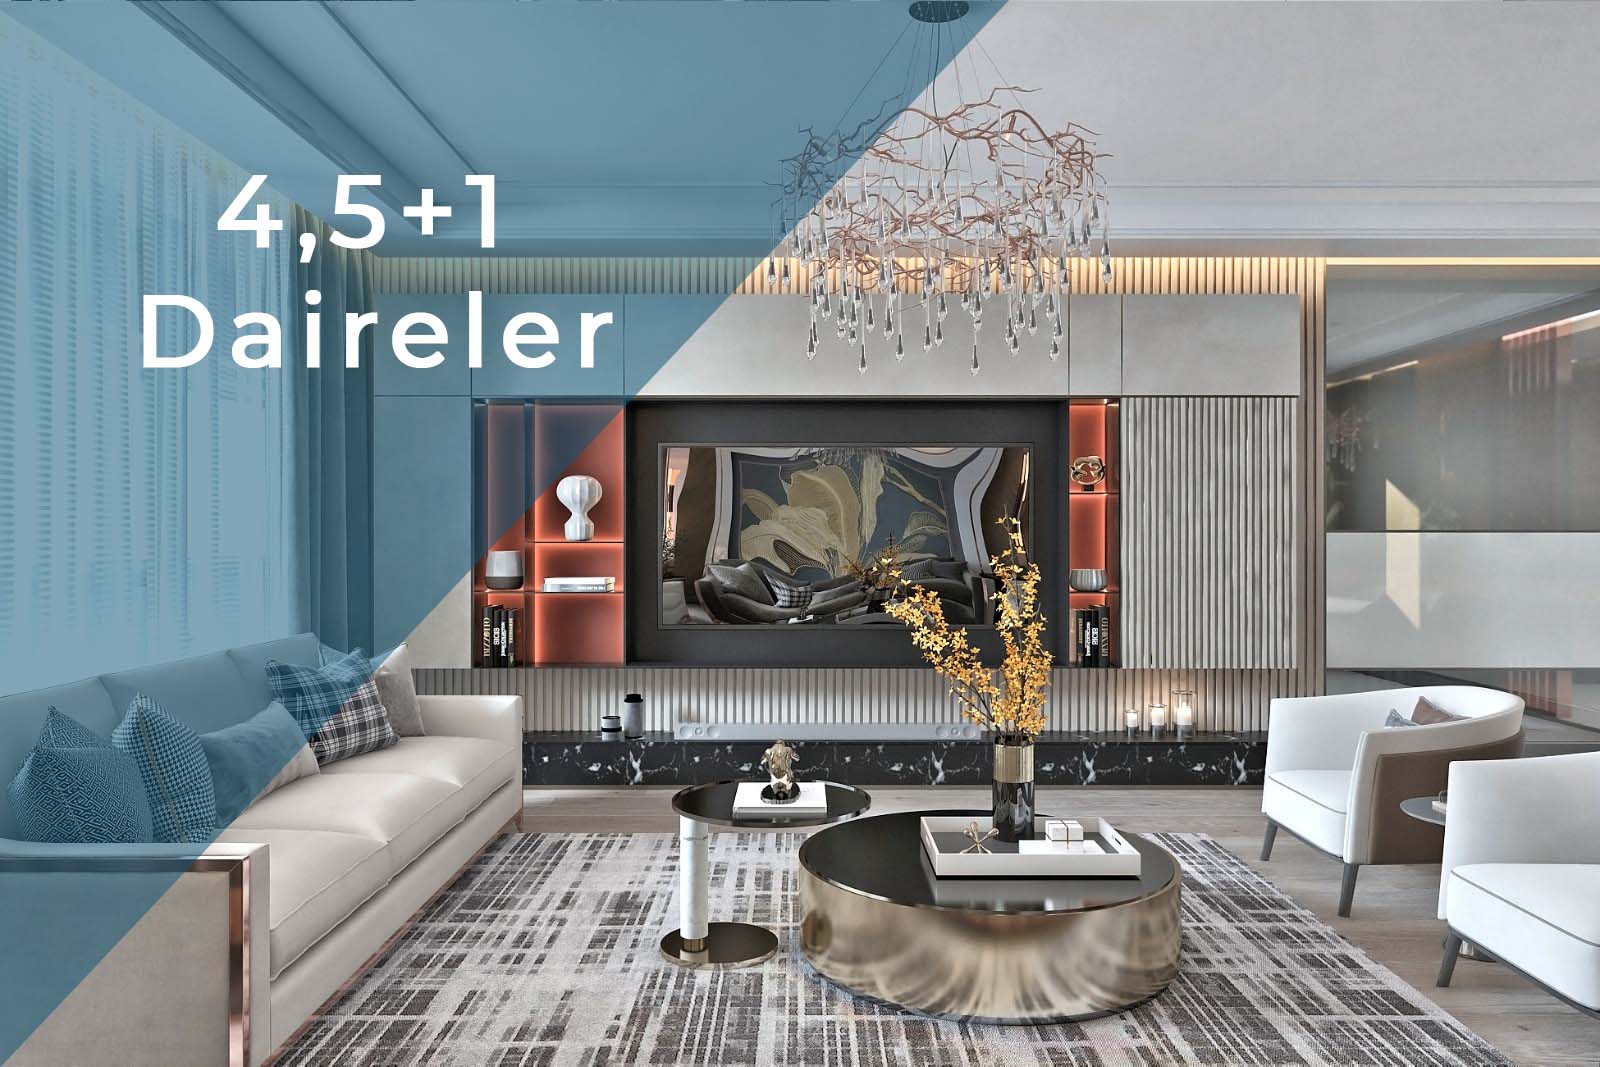 4,5+1 DAİRE